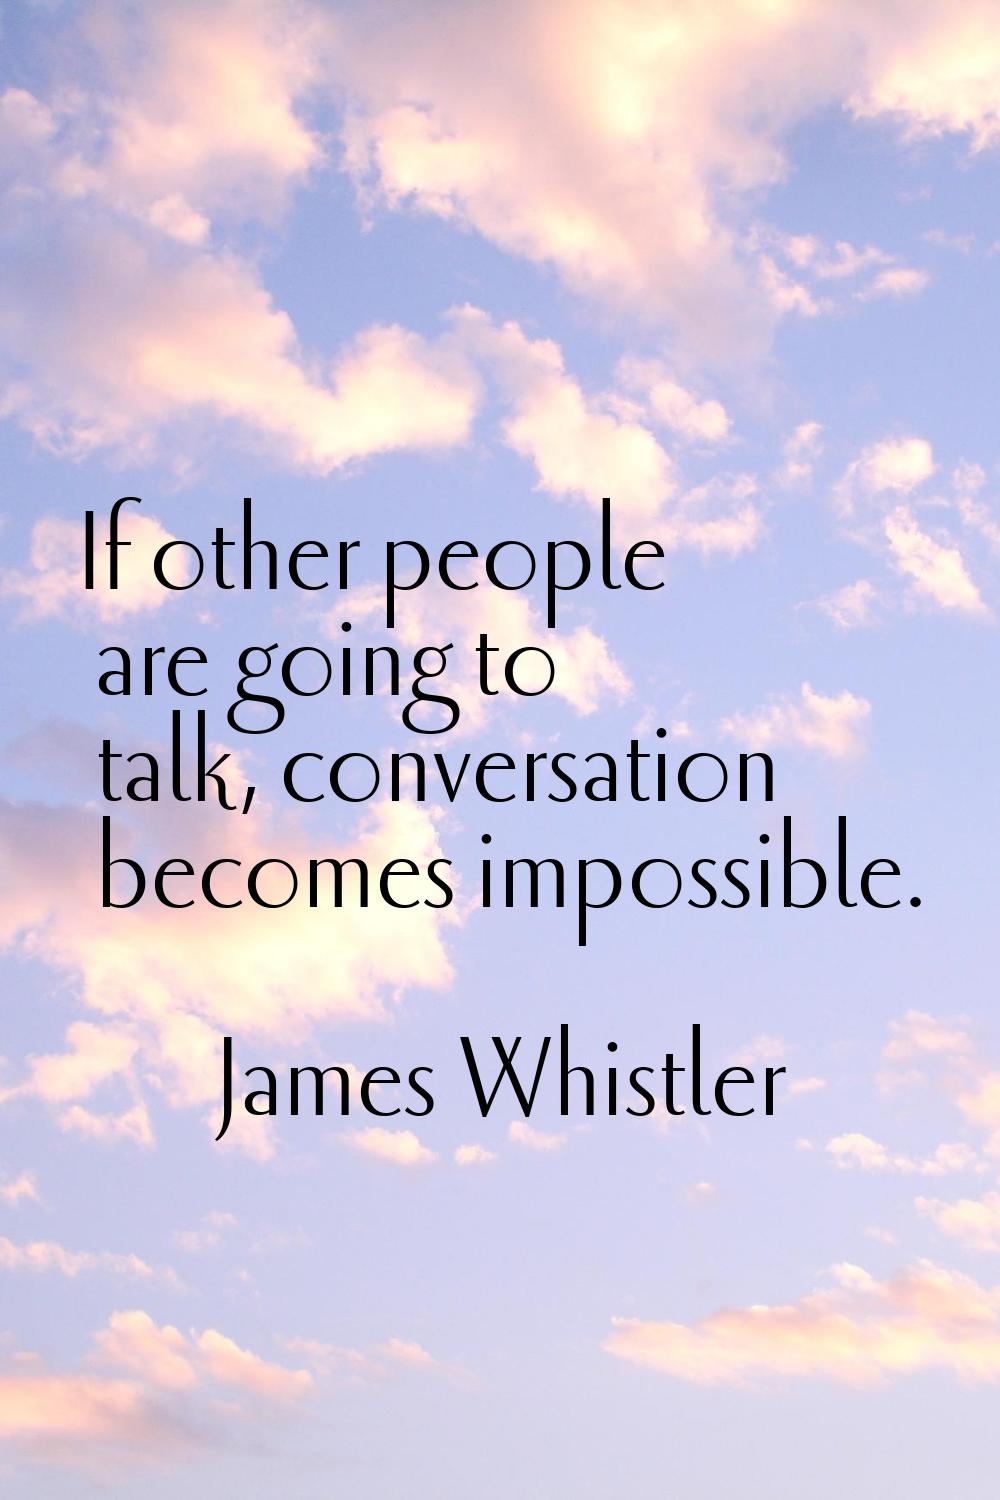 If other people are going to talk, conversation becomes impossible.